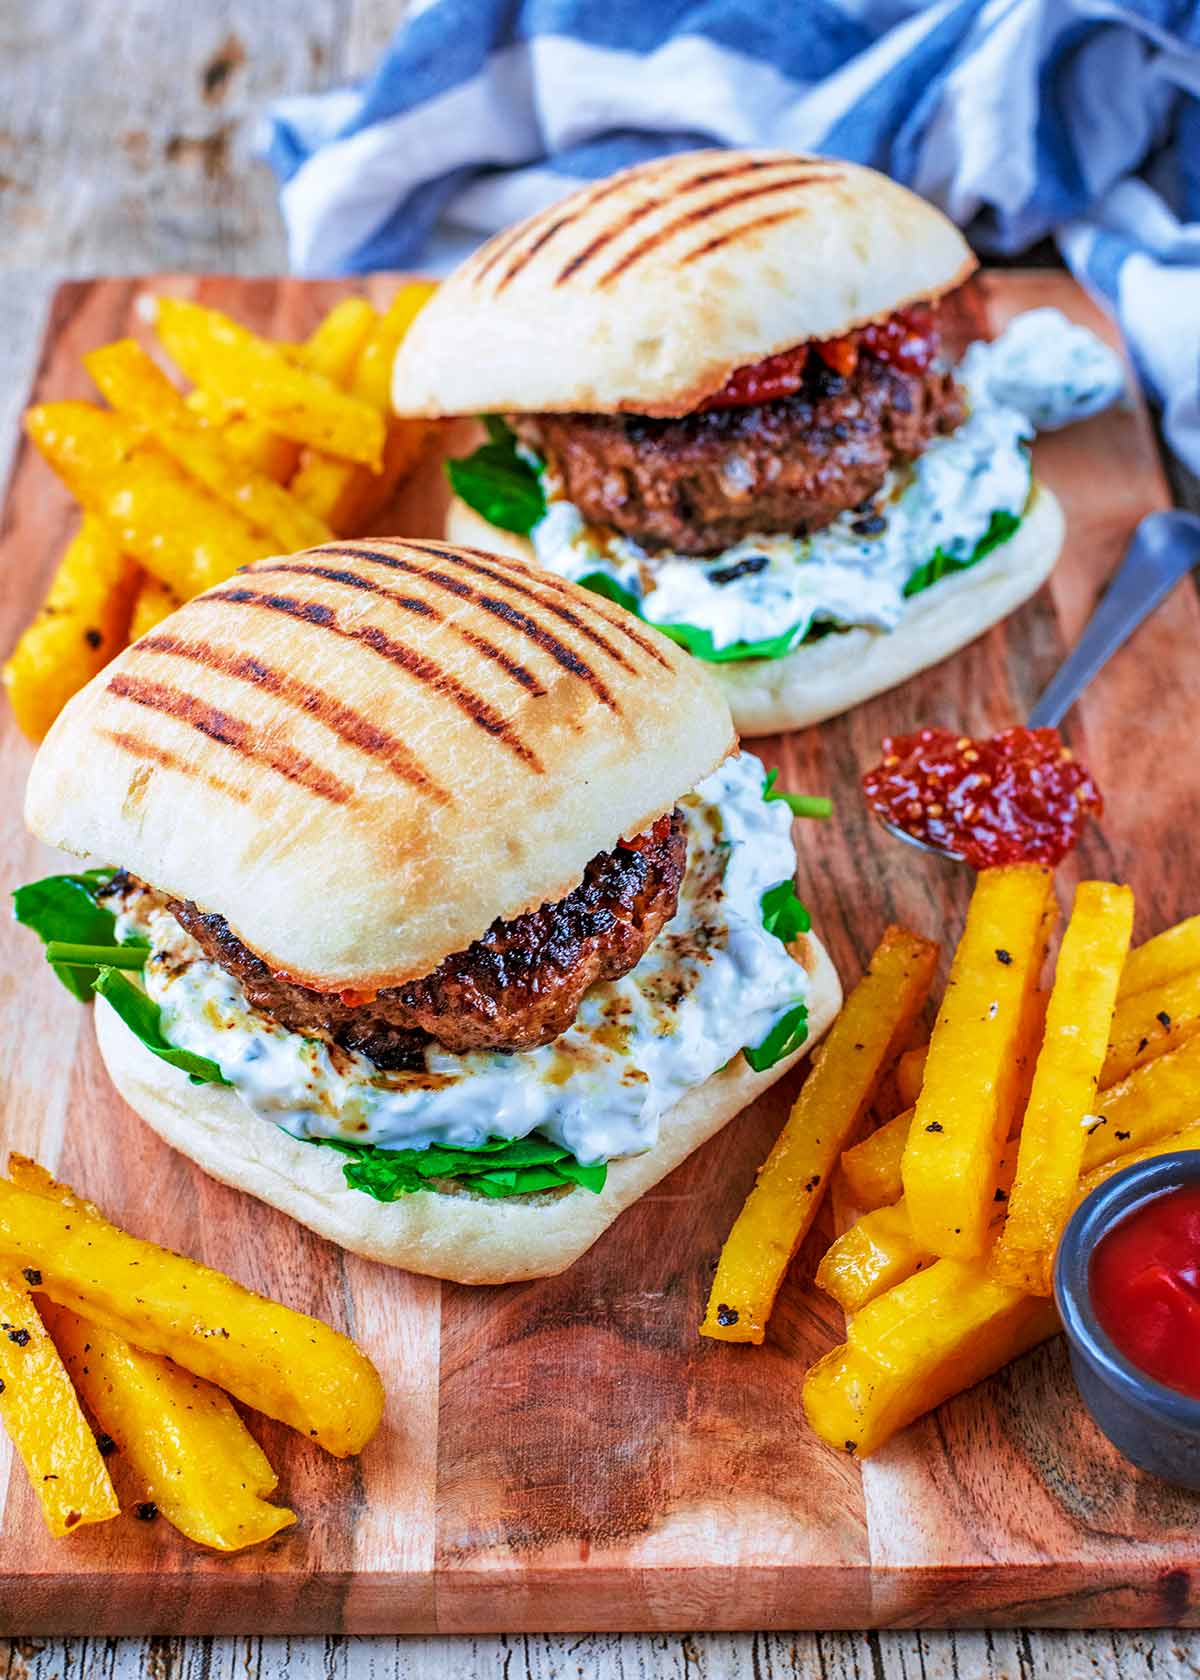 Two lamb burgers in ciabatta buns on a wooden board with fries and dip.